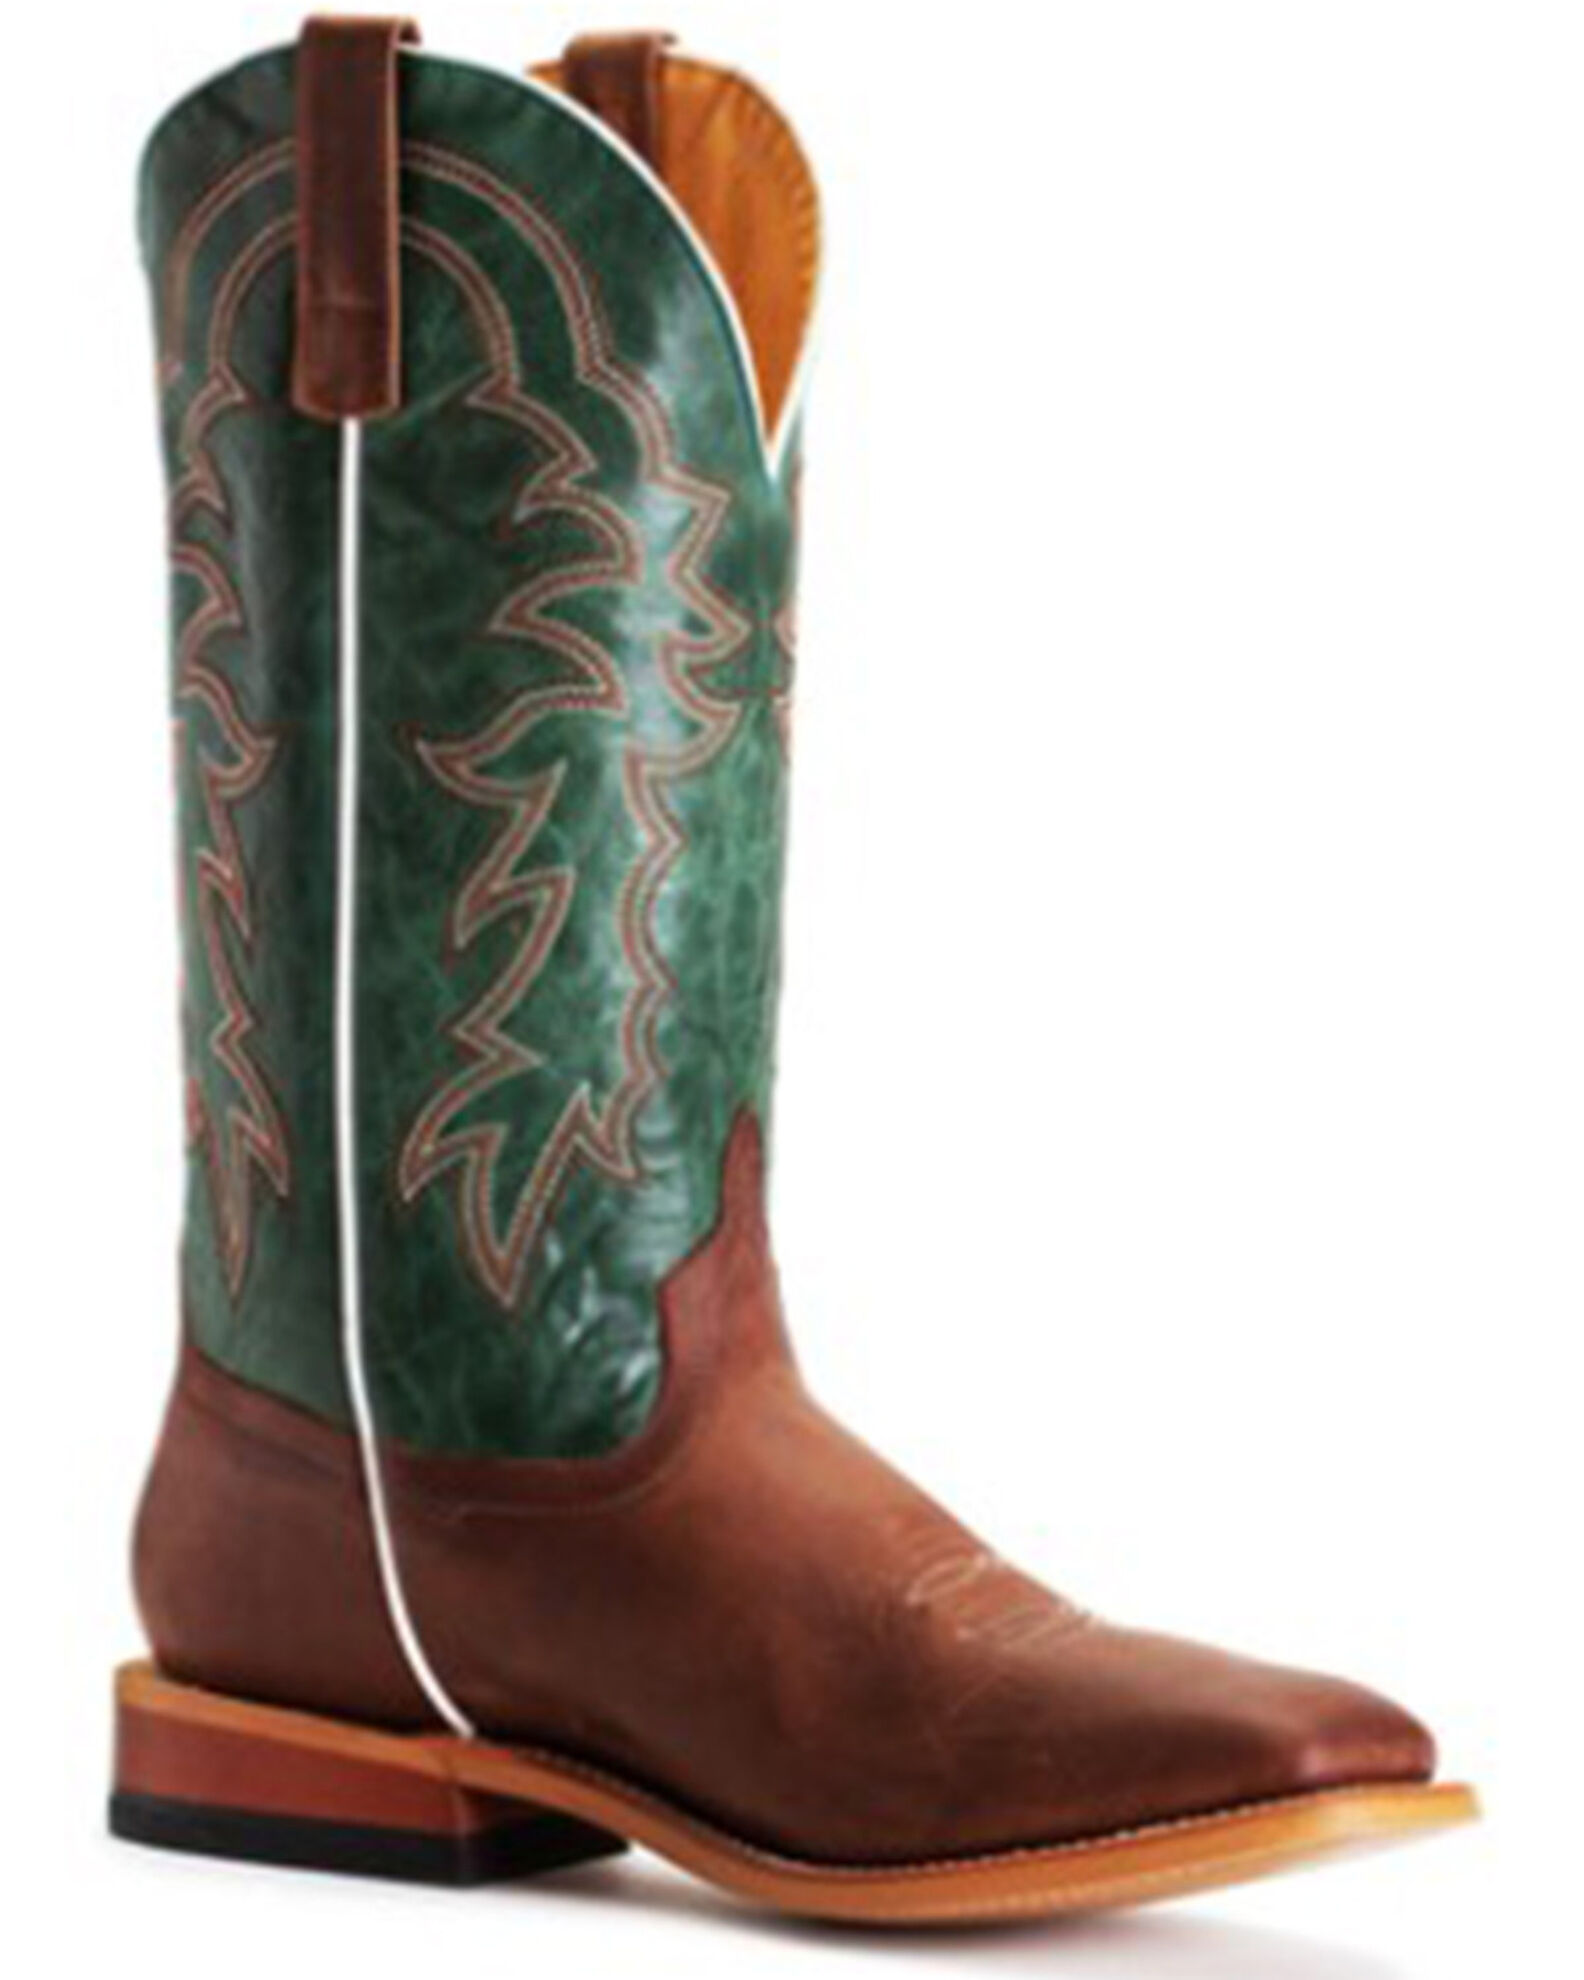 Men's Horse Power Sugared Honey Cowboy Boots - Brown/Green